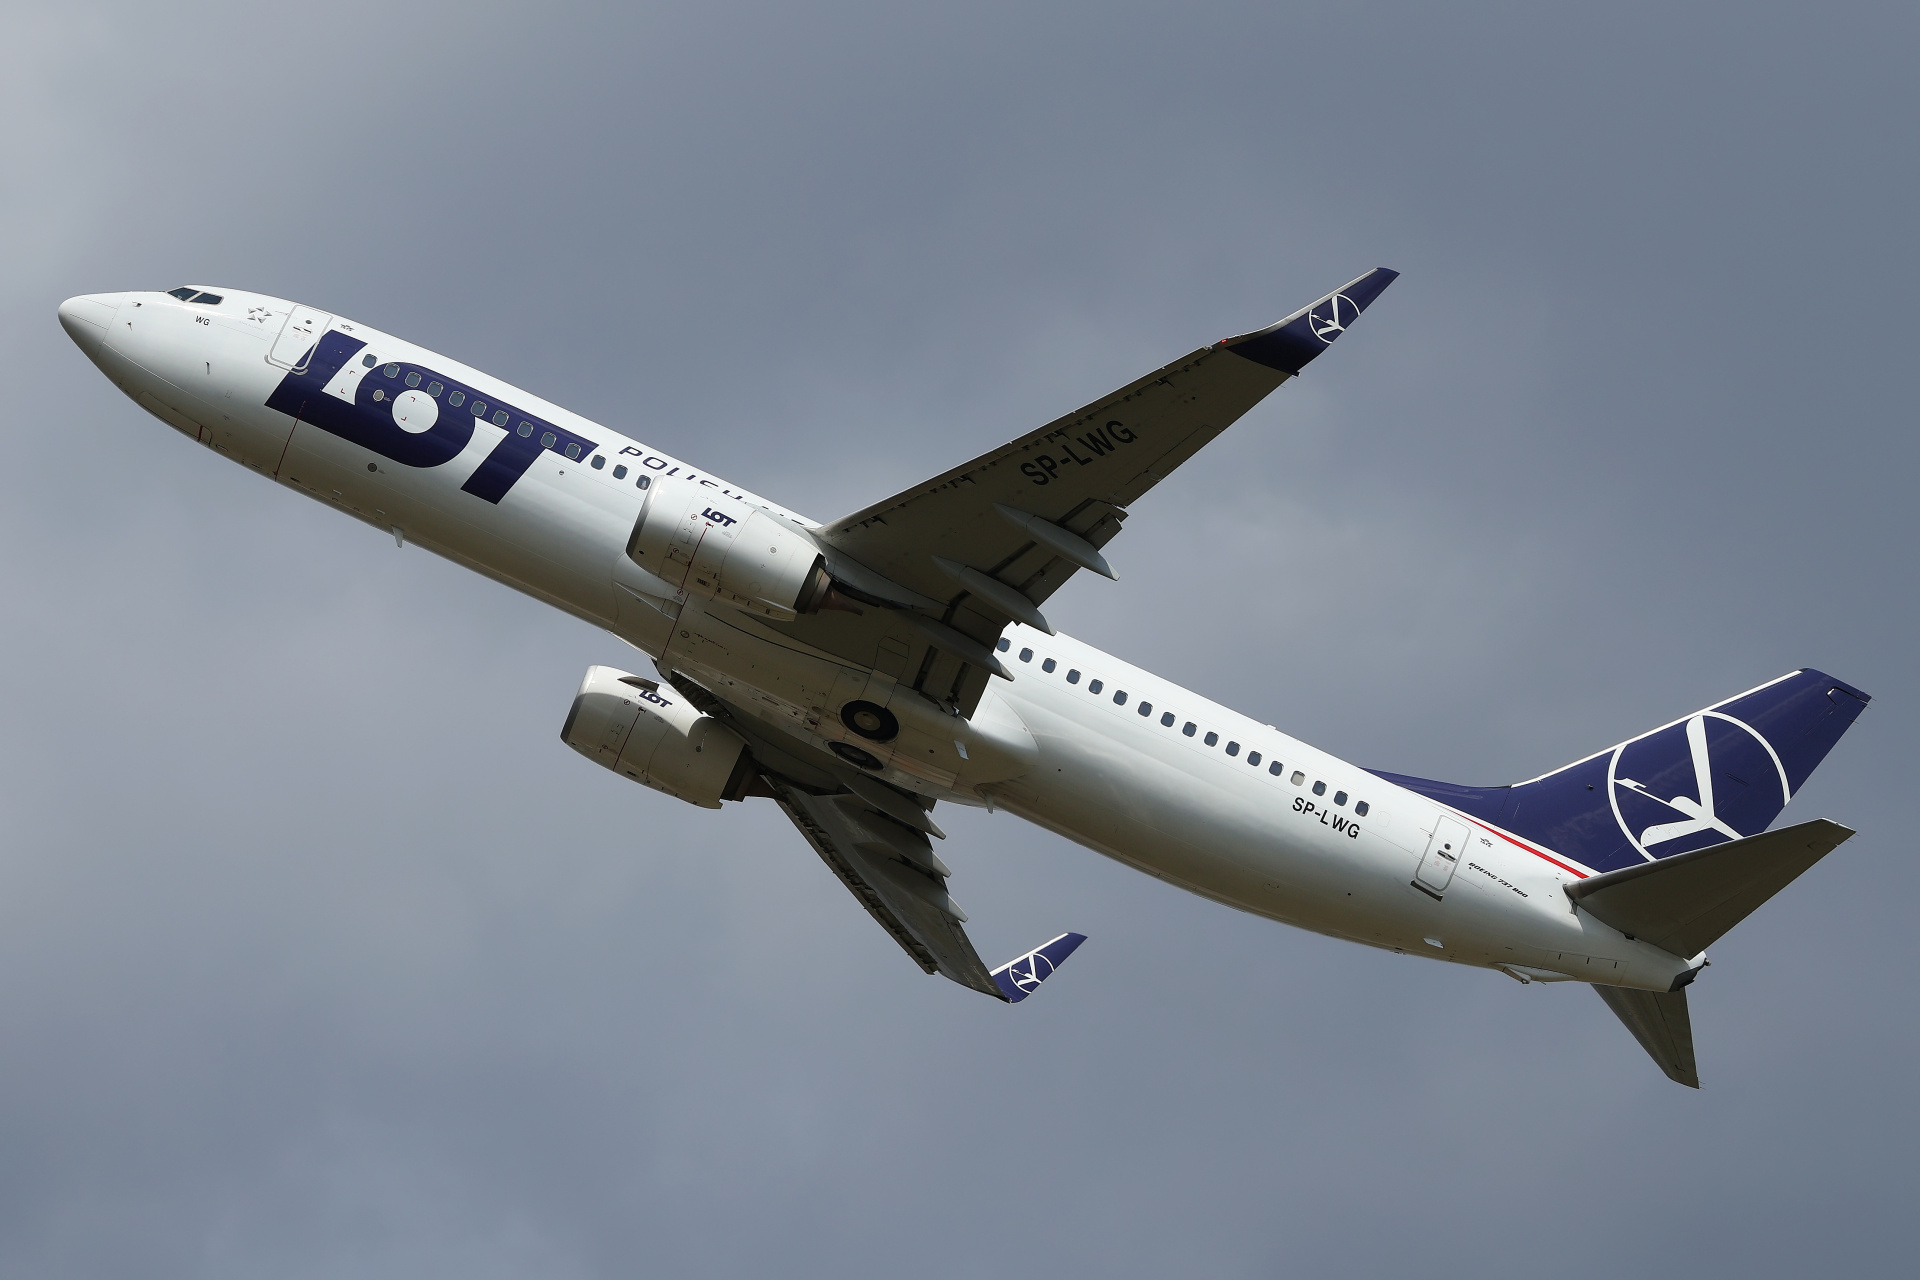 SP-LWG (Aircraft » EPWA Spotting » Boeing 737-800 » LOT Polish Airlines)